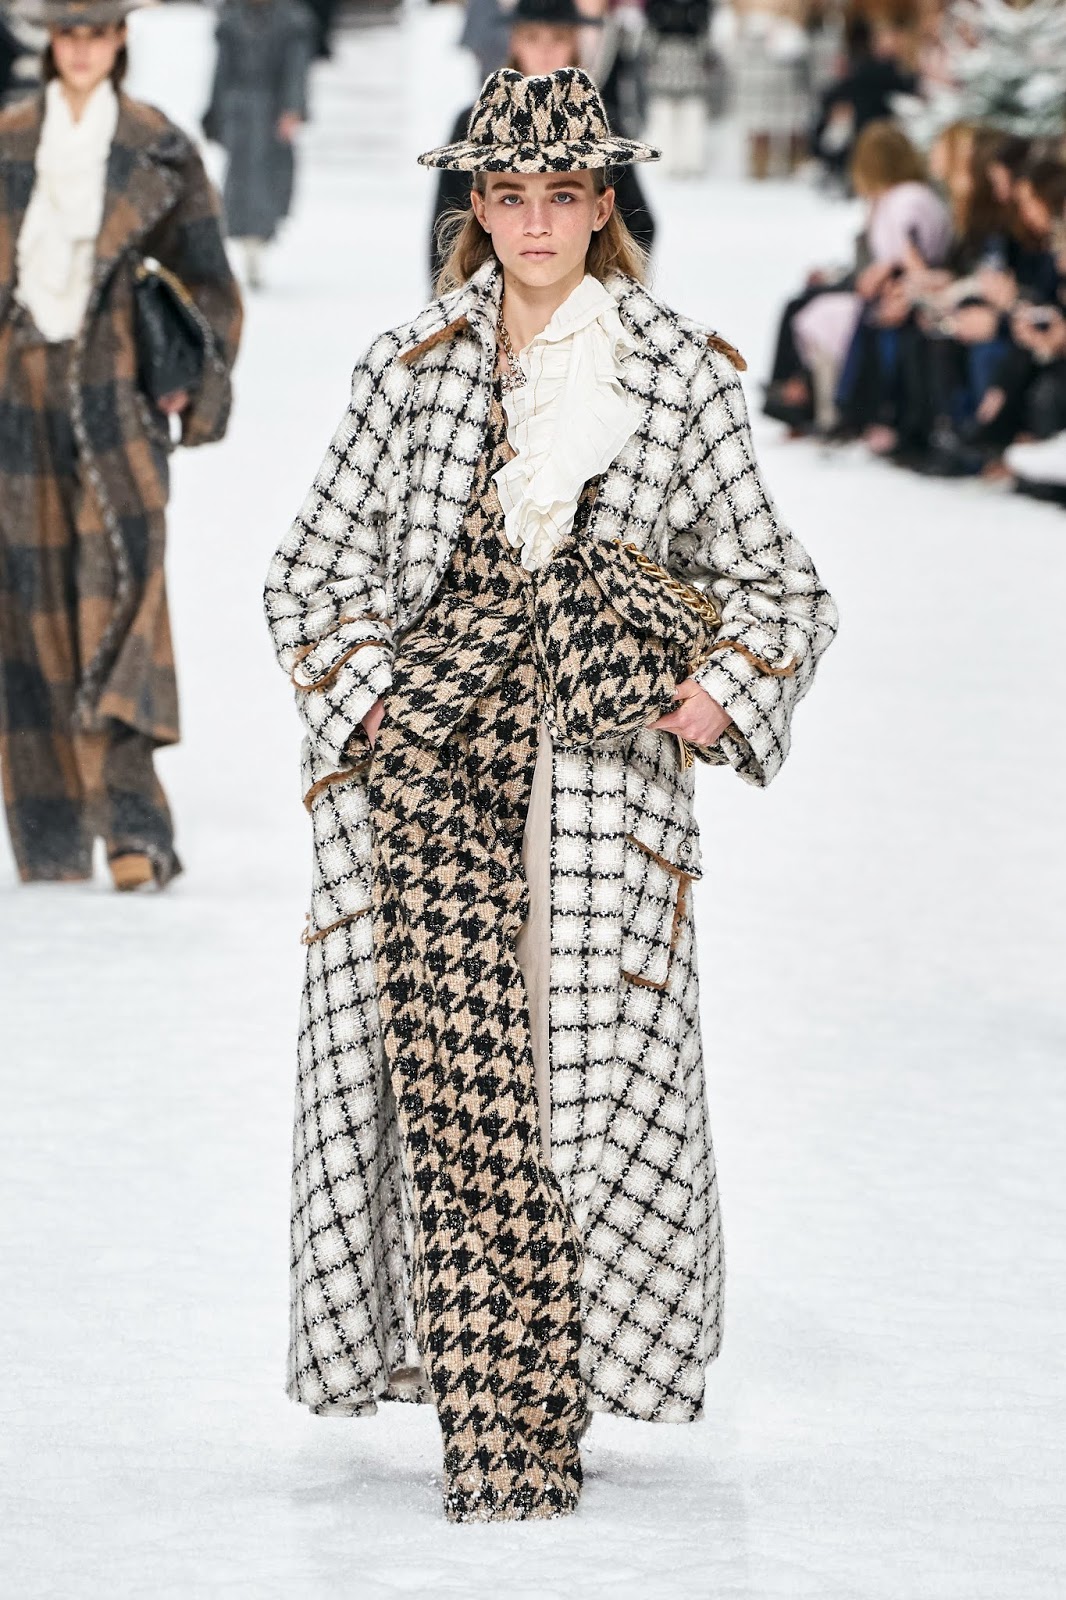 Chanel. March 7, 2019 | ZsaZsa Bellagio - Like No Other